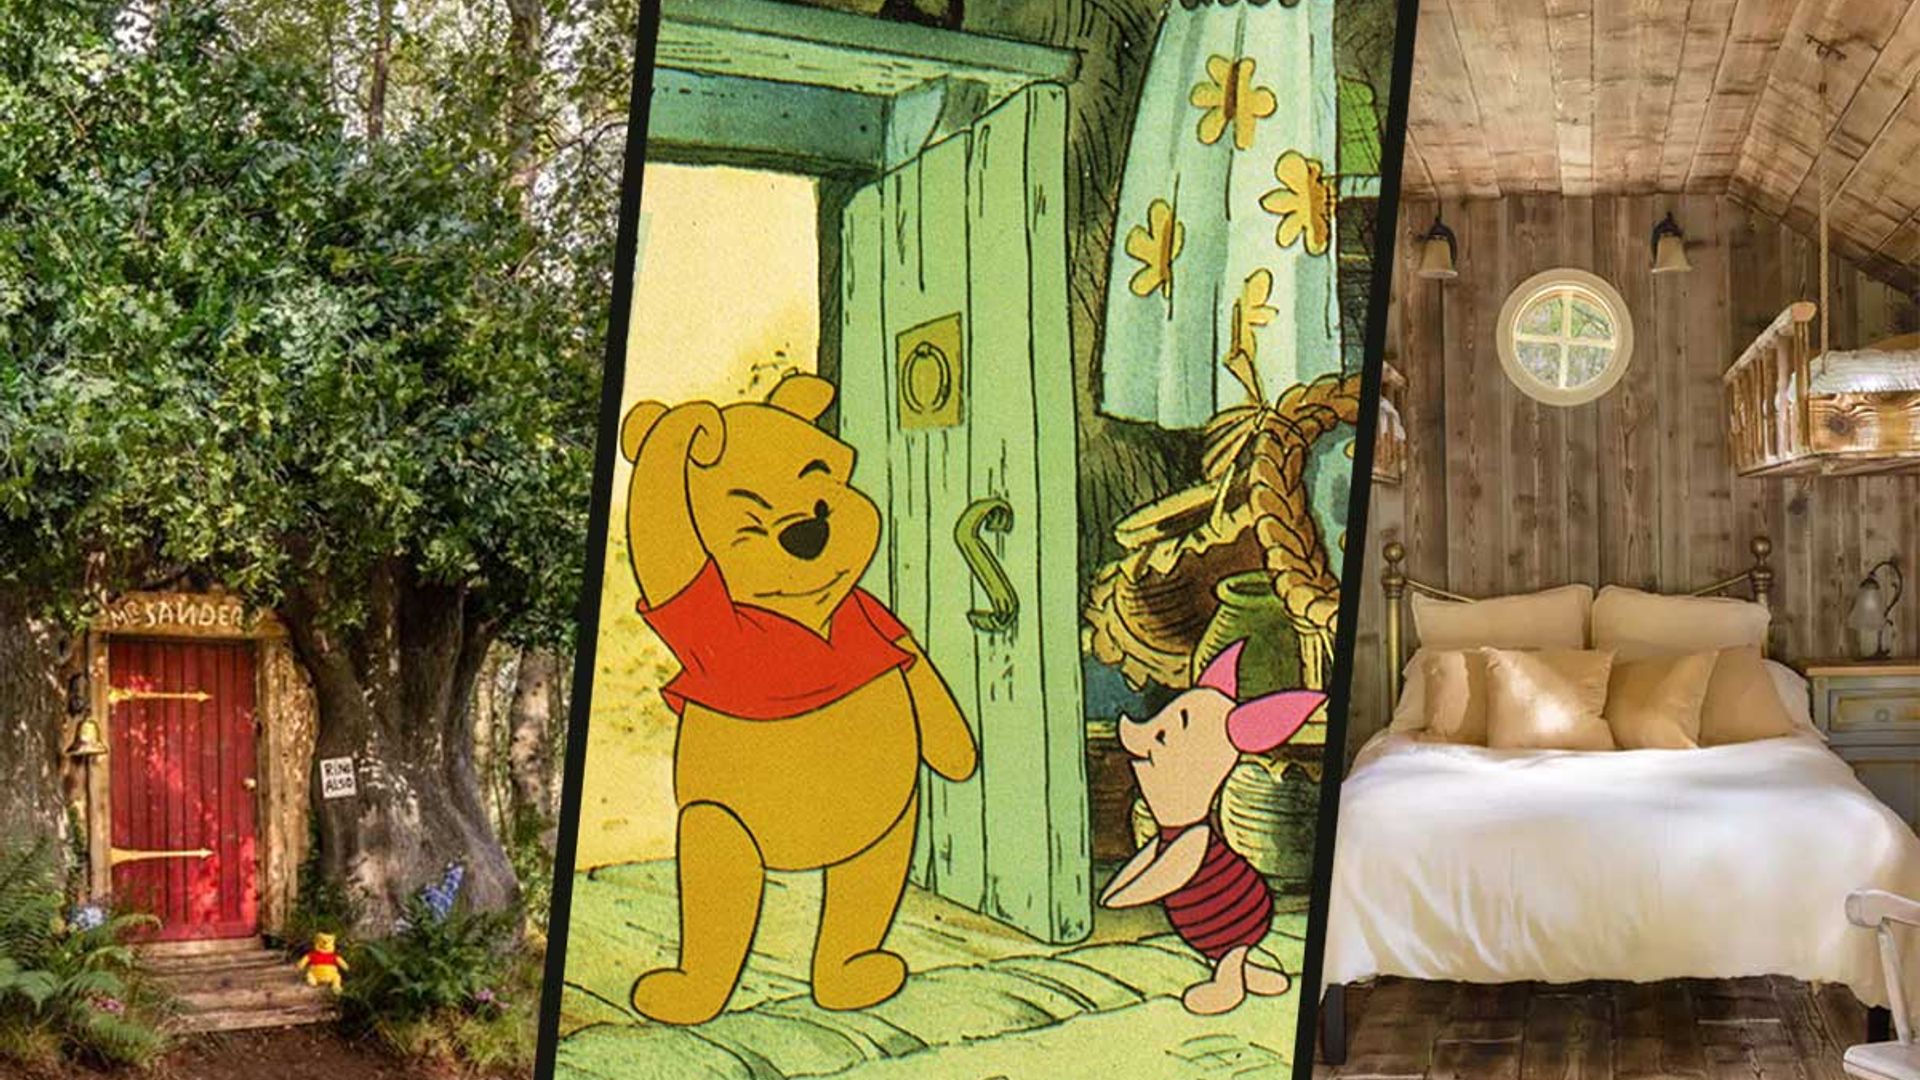 Winnie the Pooh fans can now stay in Airbnb's Hundred Acre Woods